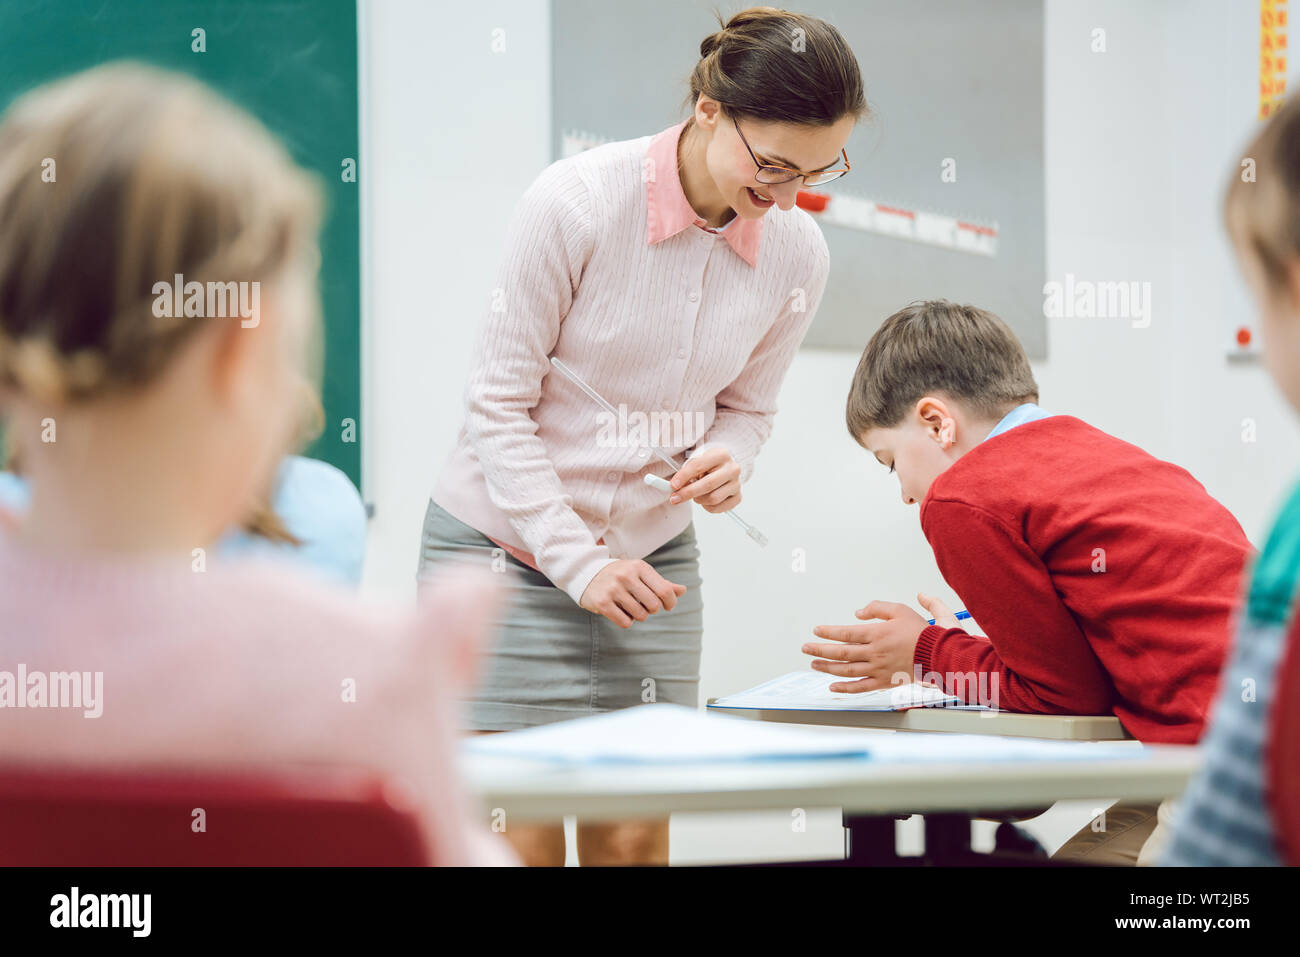 Teacher woman talking to student in class room Stock Photo